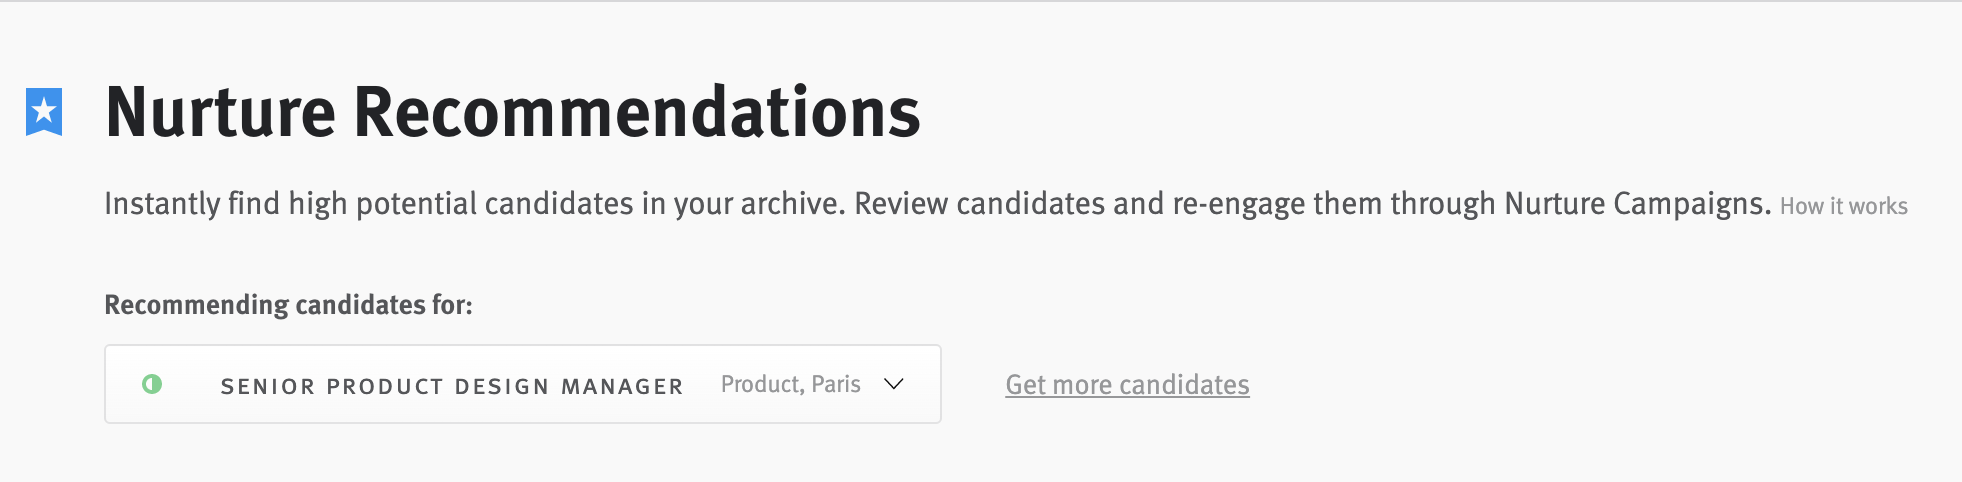 Nurture recommendations window showing selected job posting